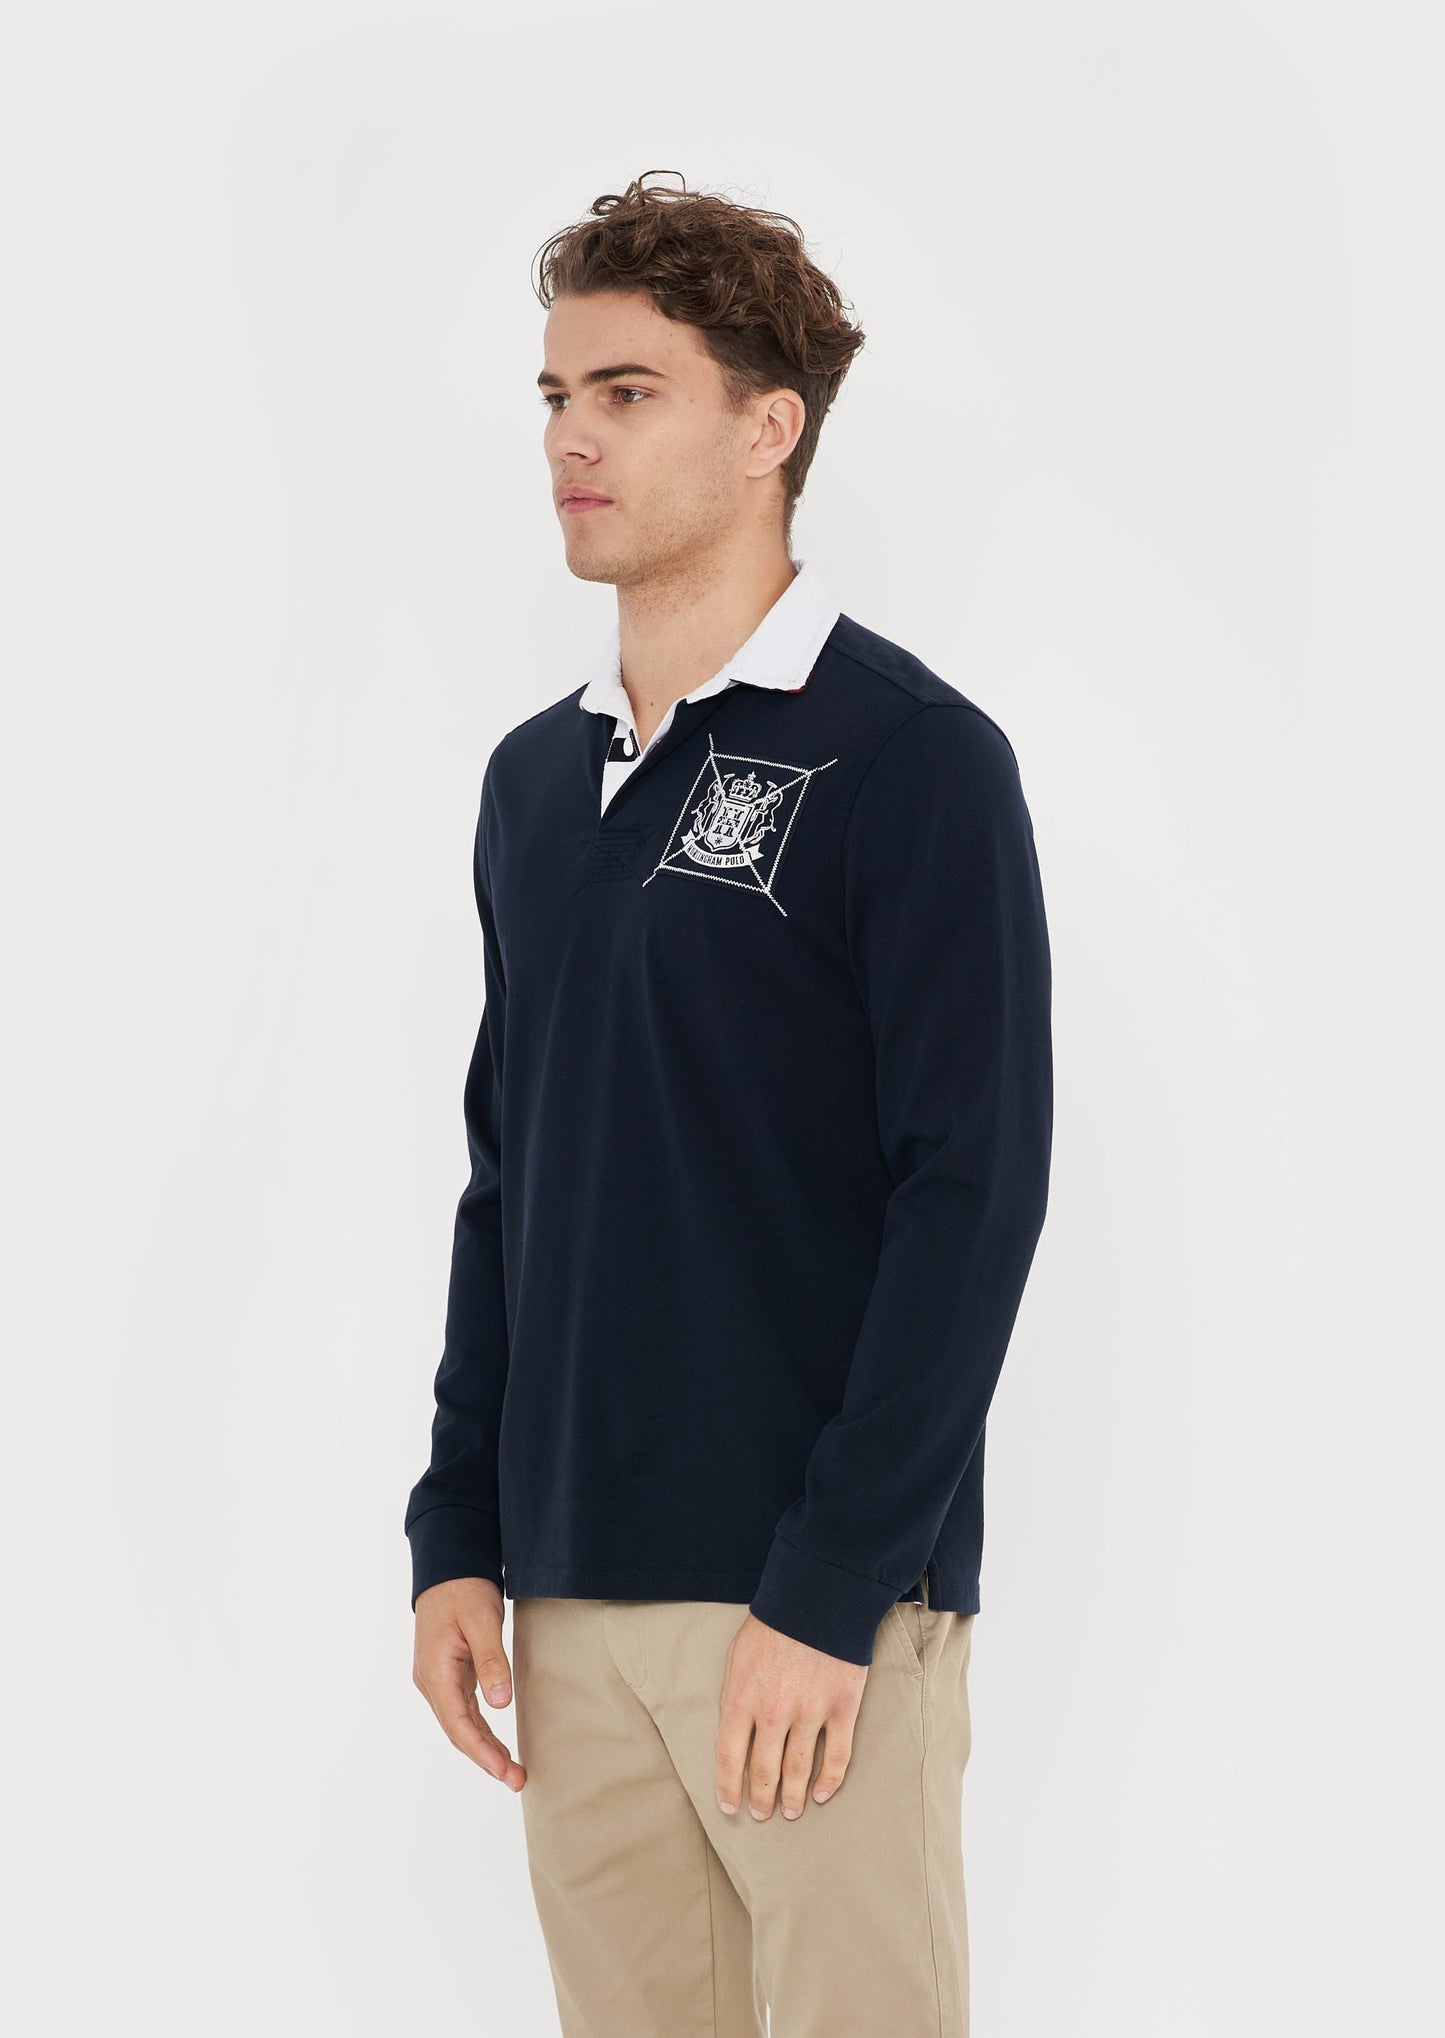 Classic Hurlingham Polo Rugby Shirt - Navy